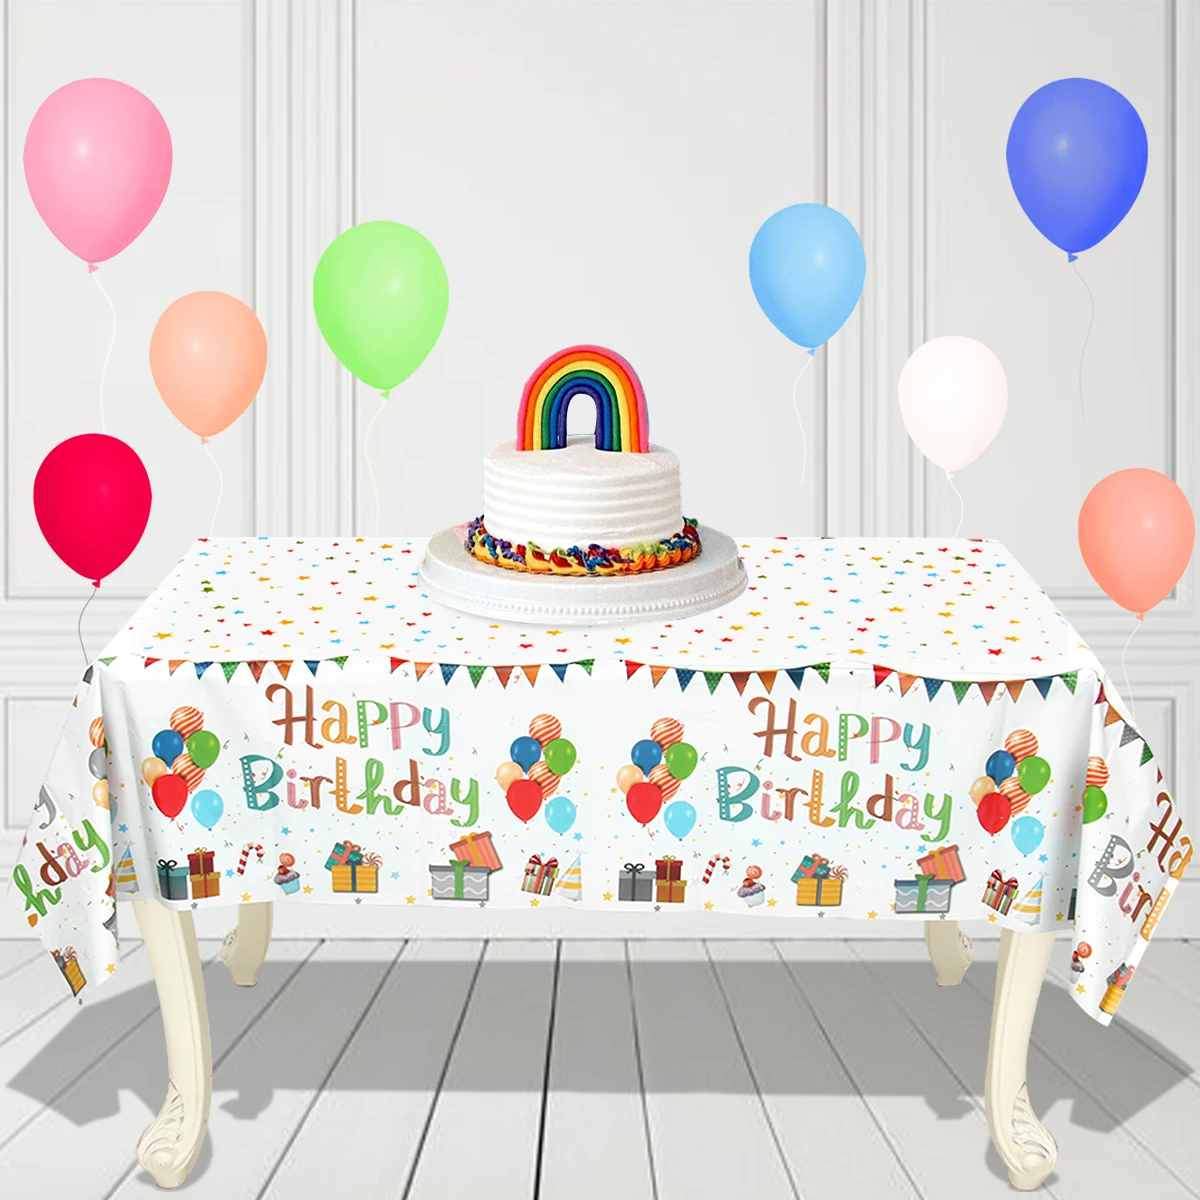 

Happy Birthday Party Tablecloth Disposable Birthday Tablecloths For Parties Kids Adult Birthday Party Table Cloths Table Cover